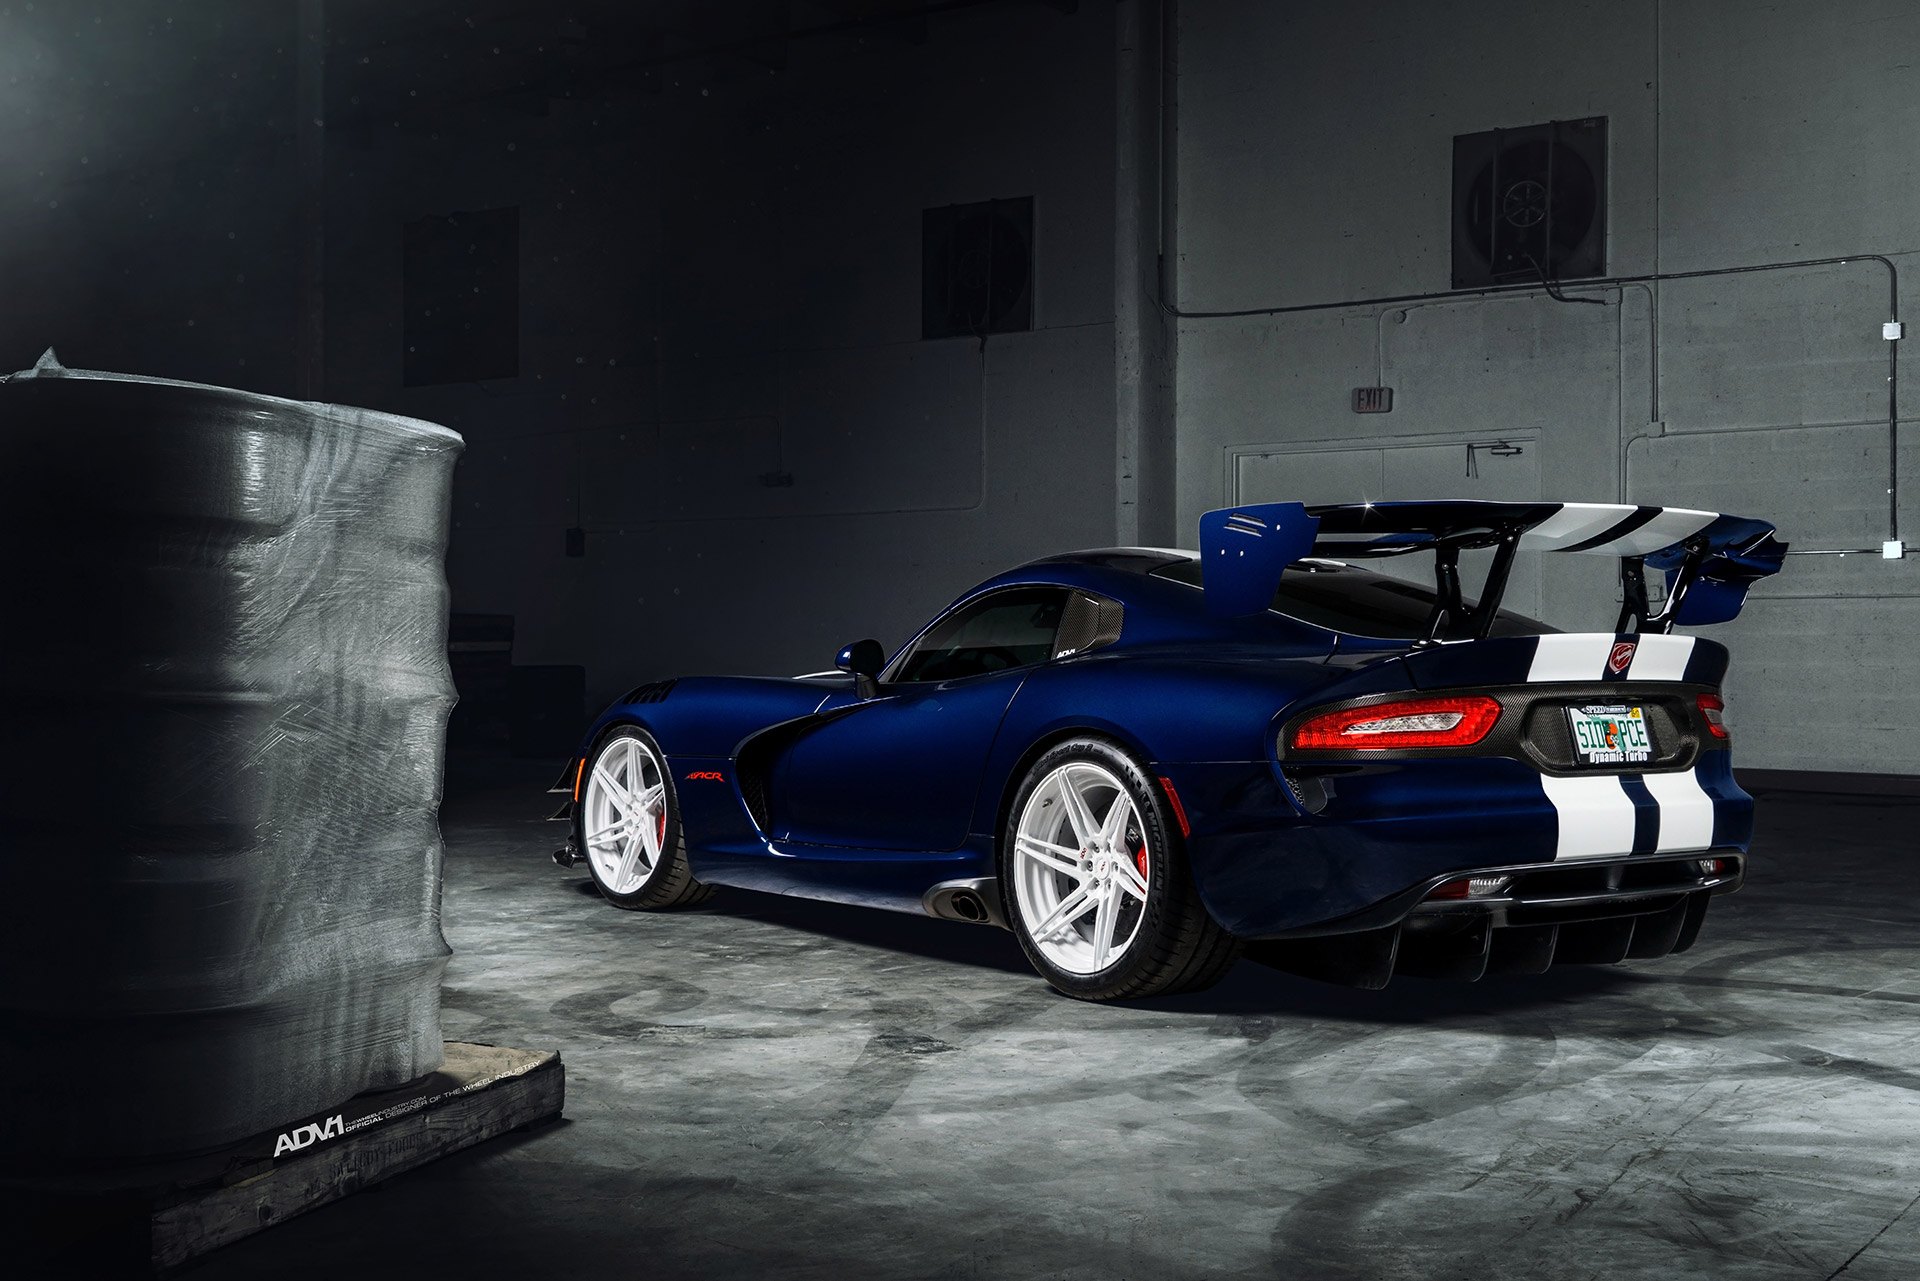 Dodge Viper With Racing Wing Spoiler - Photo by ADV.1